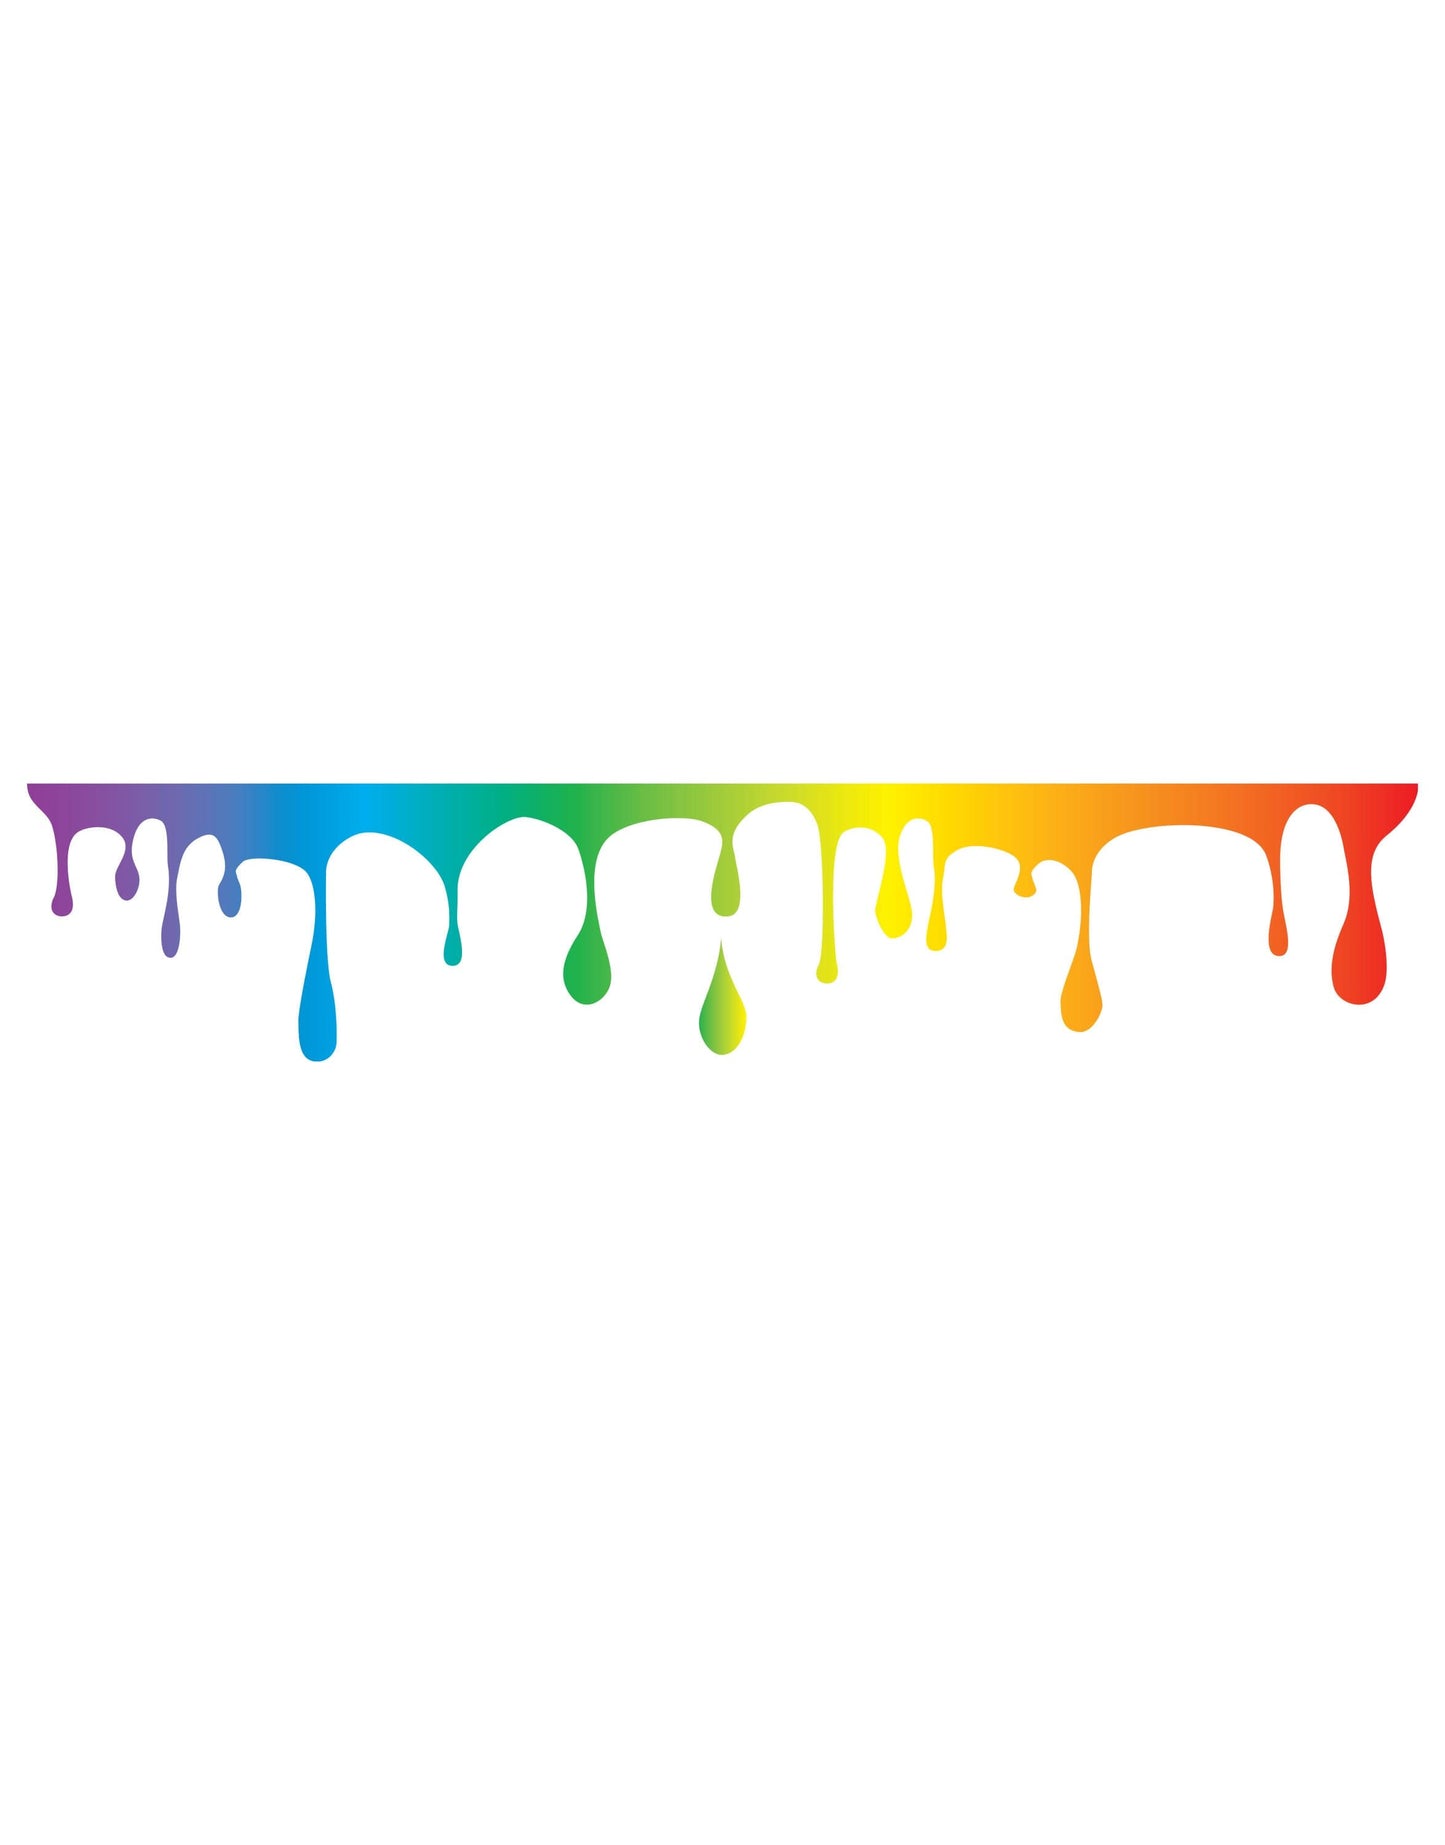 Rainbow Color Slime Dripping Wall Decal Graphic. Kid’s Room Home Decor. #6395